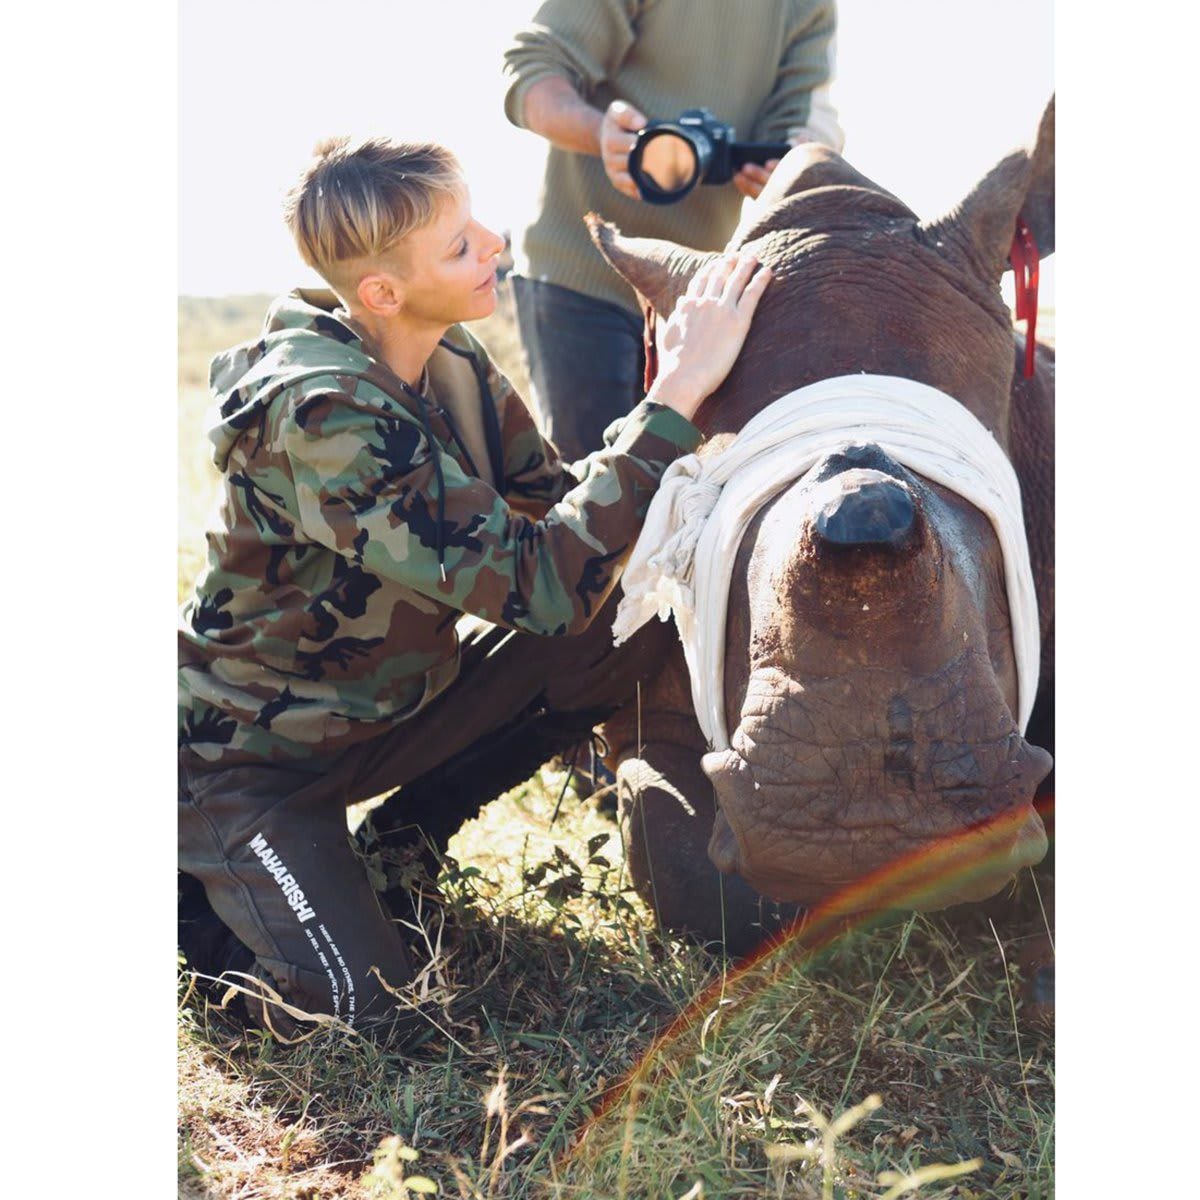 The royal mom of two said that she wants to do all that she can to protect rhinos